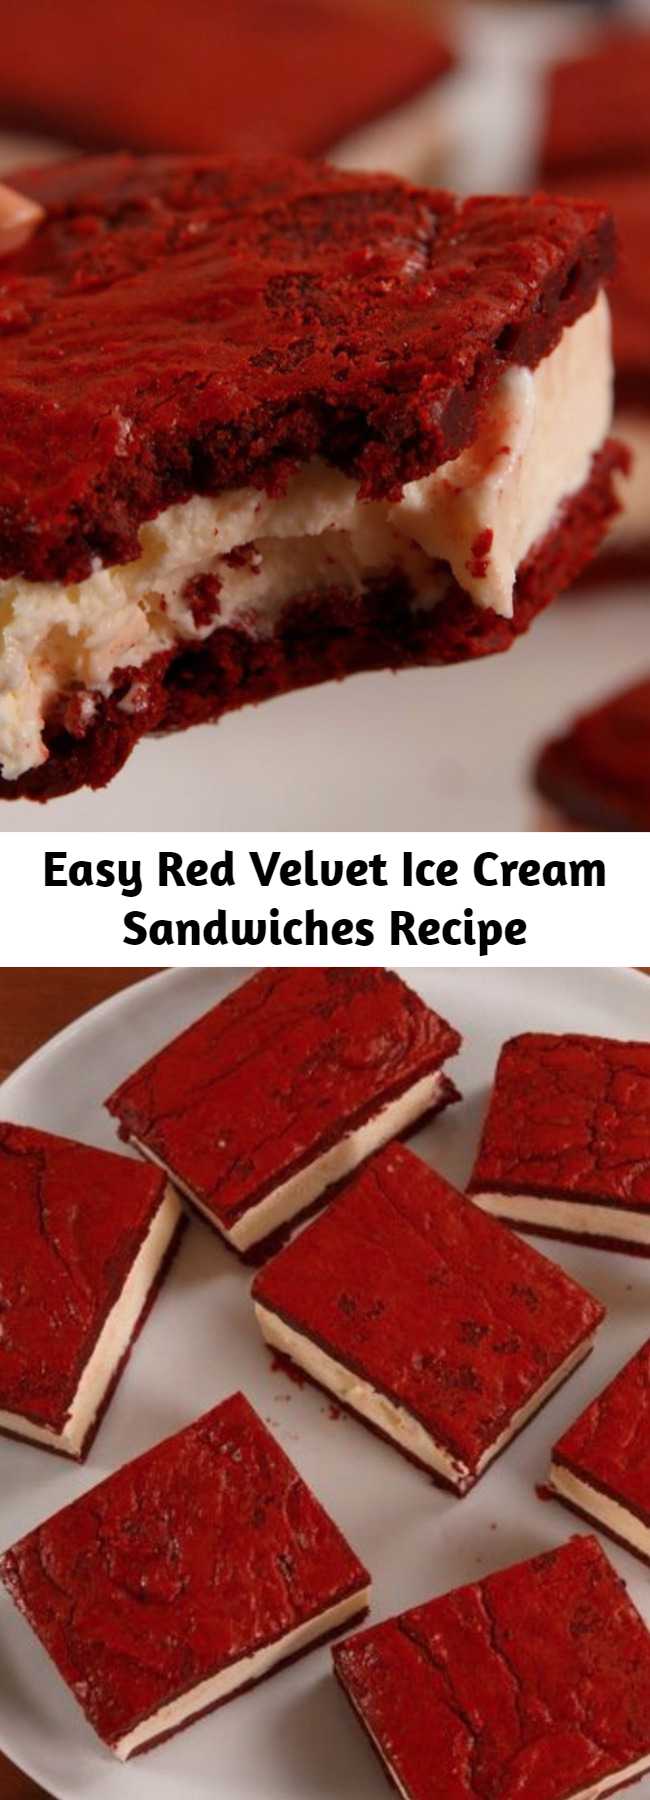 Easy Red Velvet Ice Cream Sandwiches Recipe - Red Velvet Ice Cream Sandwiches Recipe are the ultimate summer treat with homemade red velvet cookies, vanilla ice cream, and red white and blue sprinkles for the fourth of July or Memorial Day! Make them ahead of time for the BBQ. This is by far one of the best ways we've used box cake mix to date.